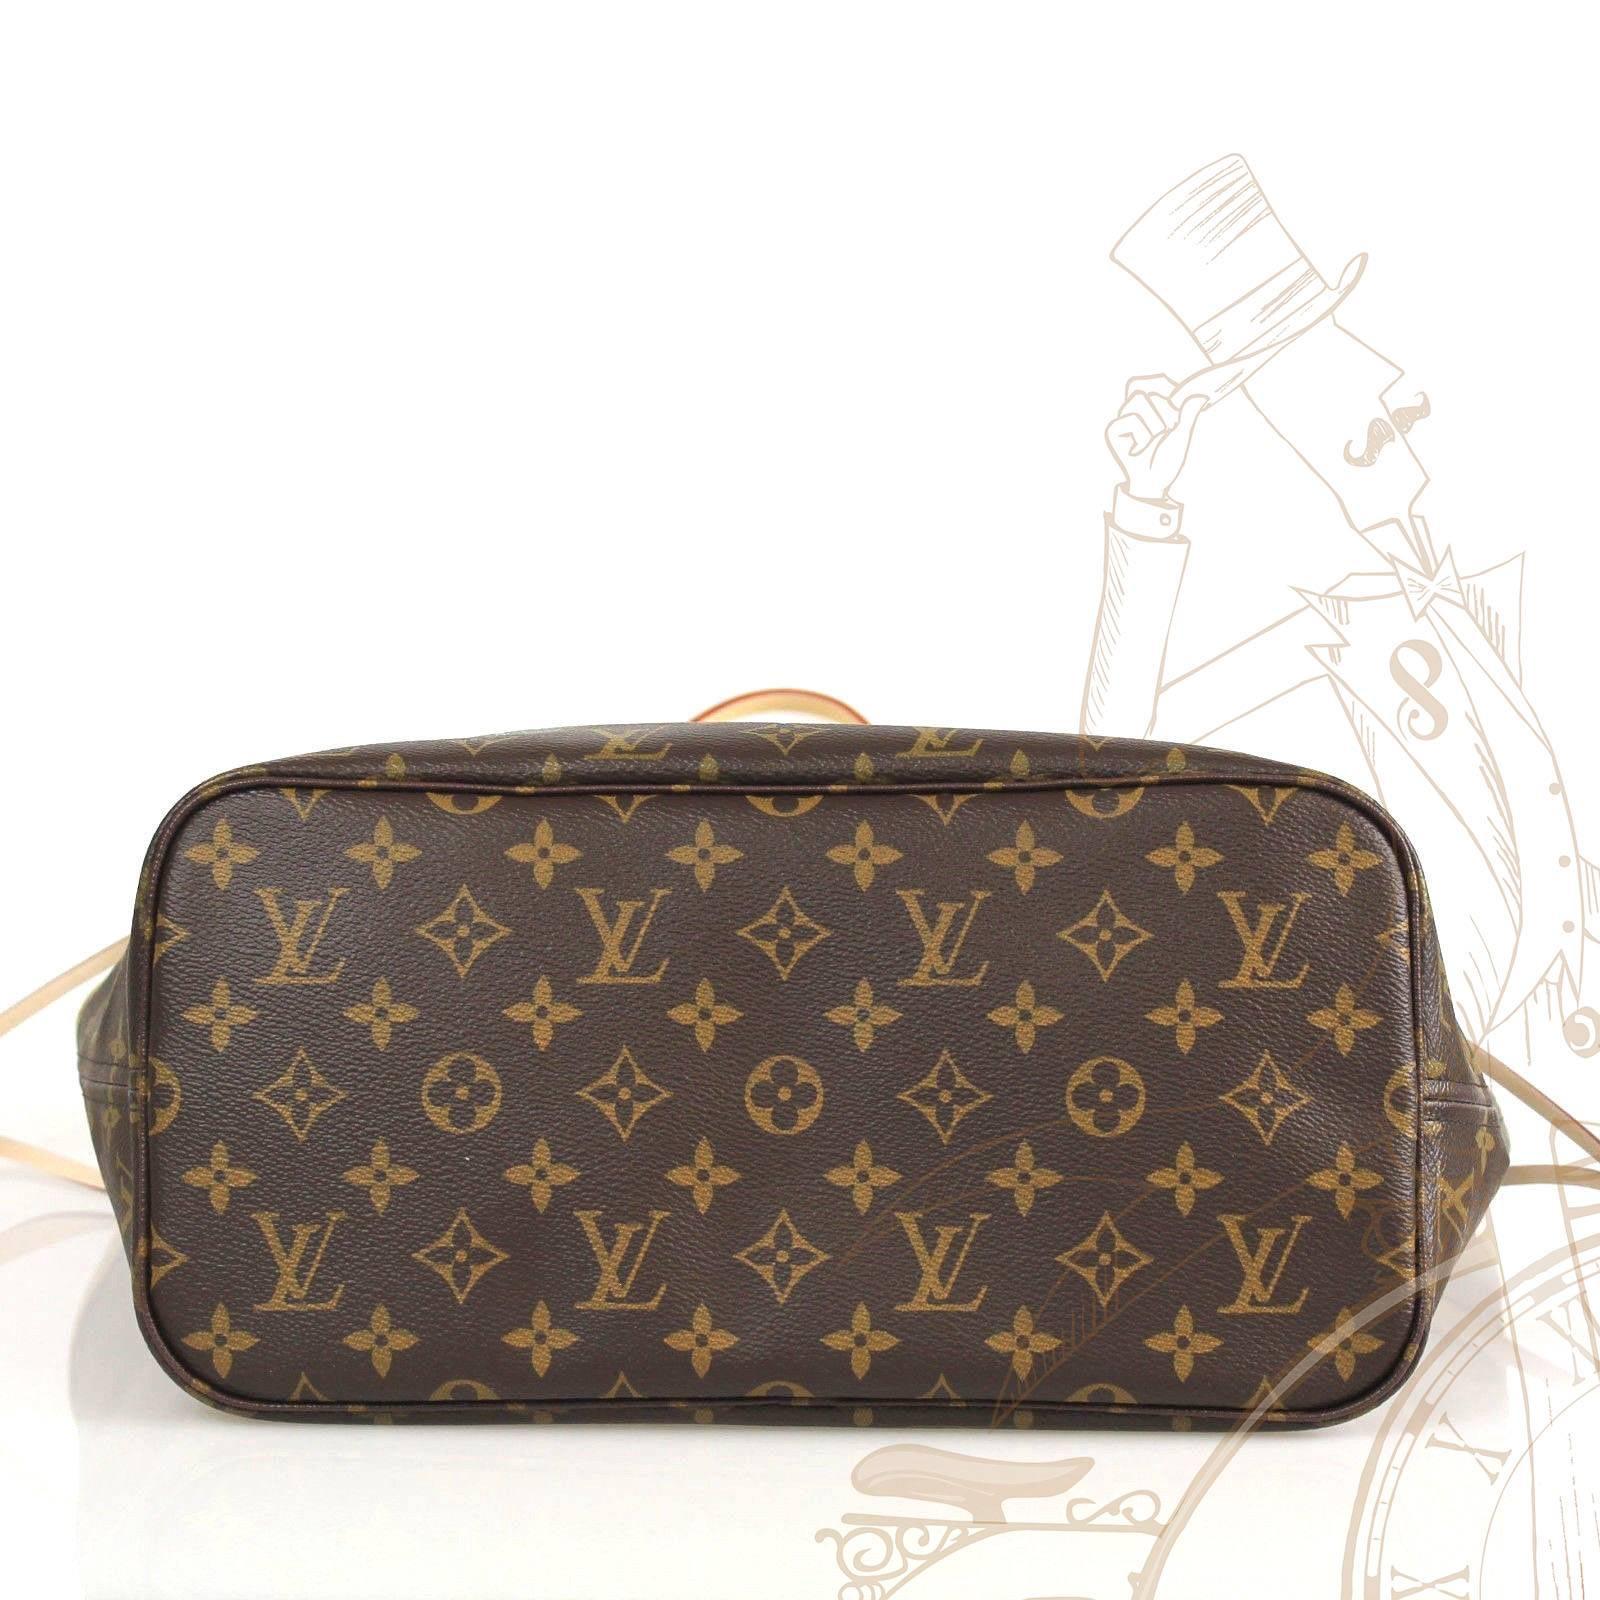 Louis Vuitton Monogram Canvas Neverfull Mm V Blue Limited Edition Shoulder Bag In New Condition For Sale In Miami, FL